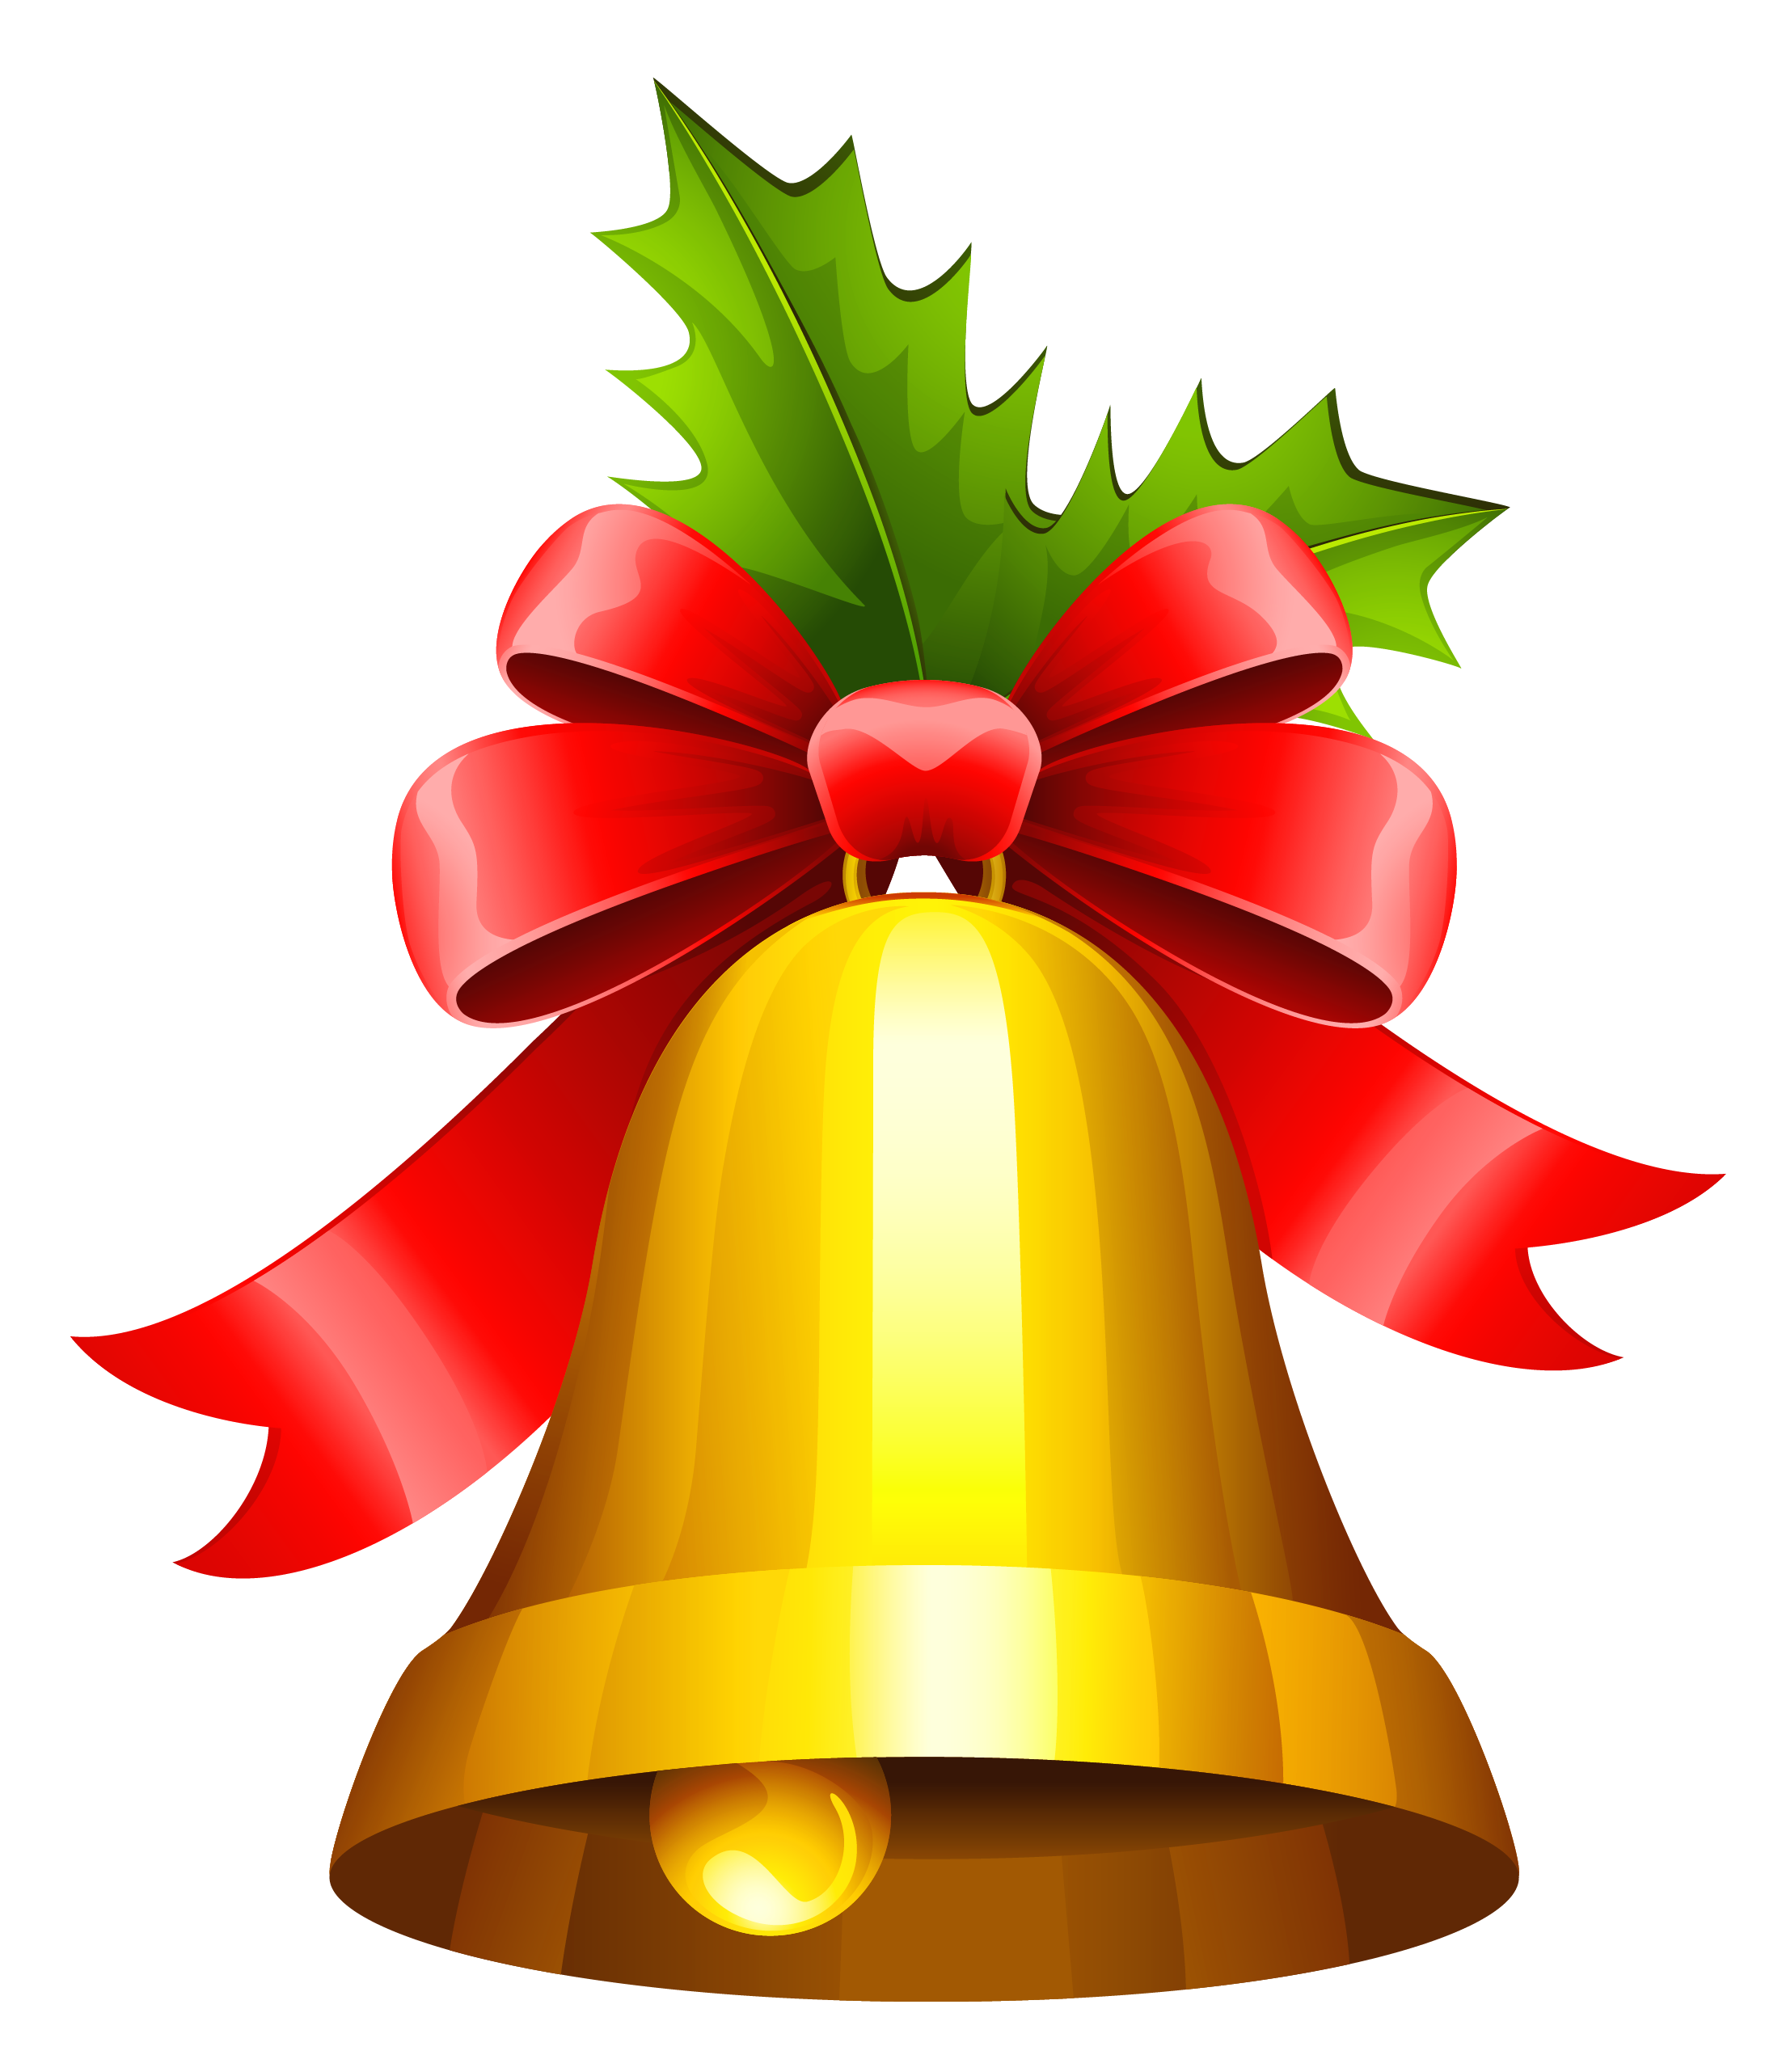 Christmas Bell Png Transparent Image - Christmas Bell, Transparent background PNG HD thumbnail